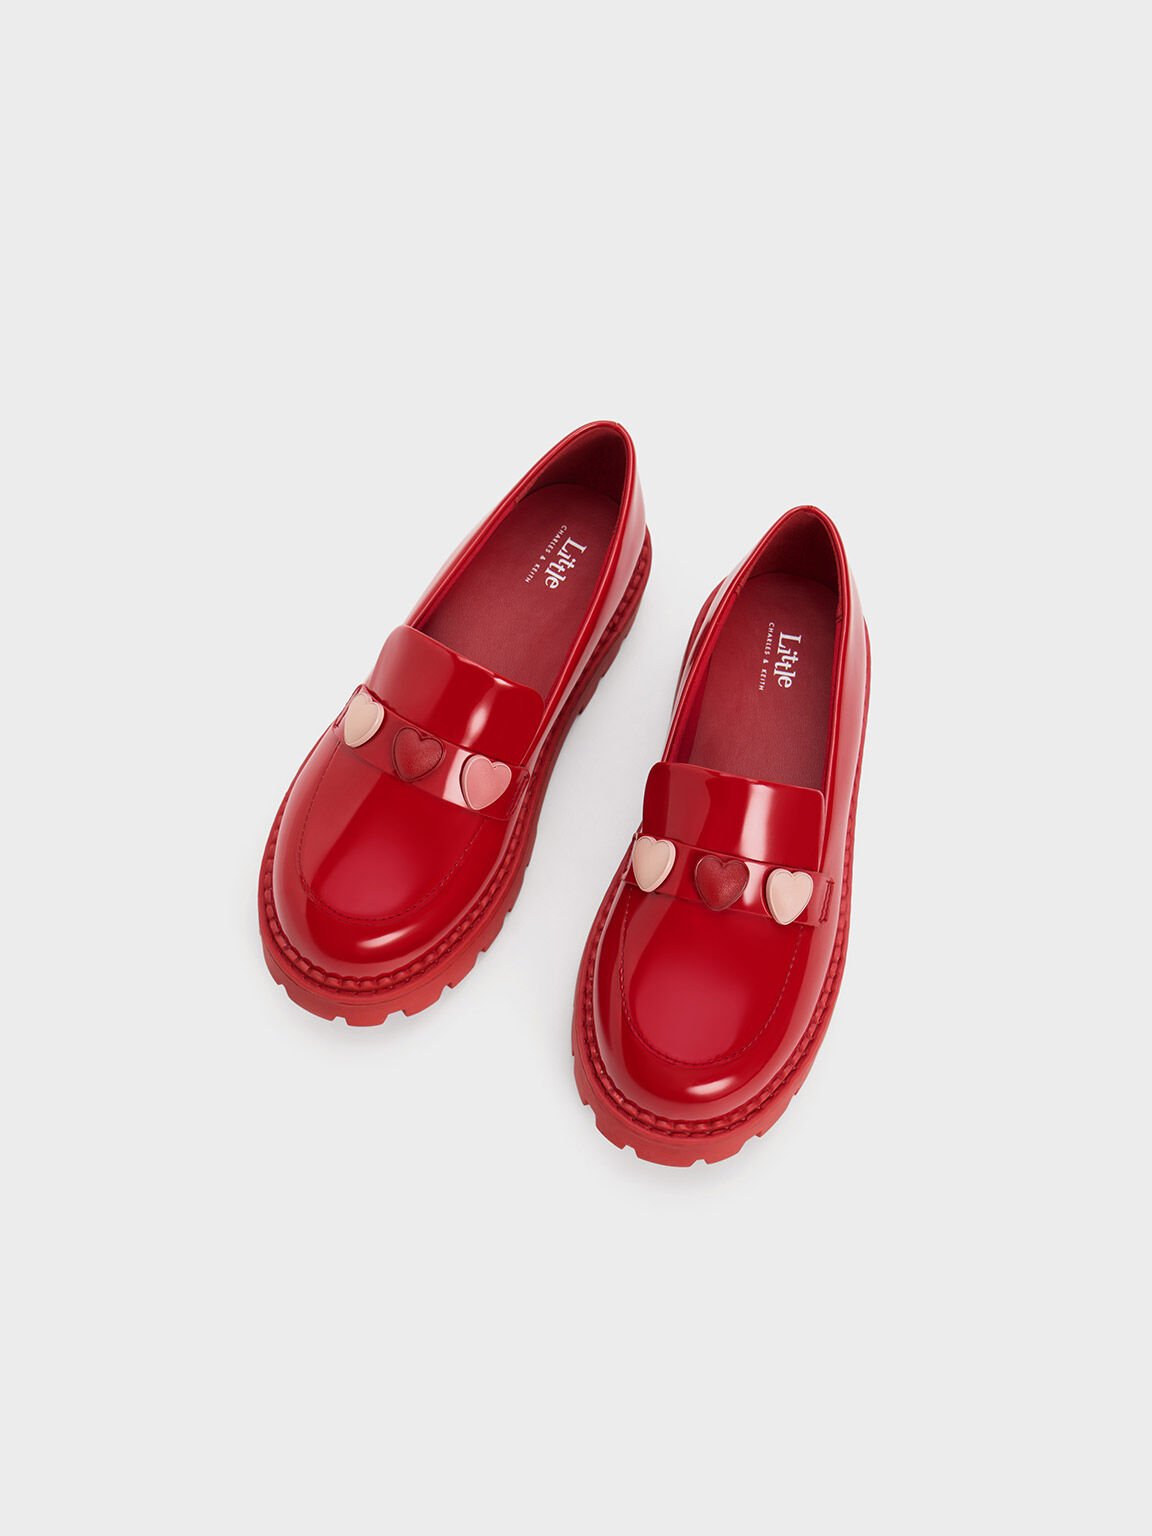 Girls' Heart-Motif Patent Penny Loafers, Red, hi-res